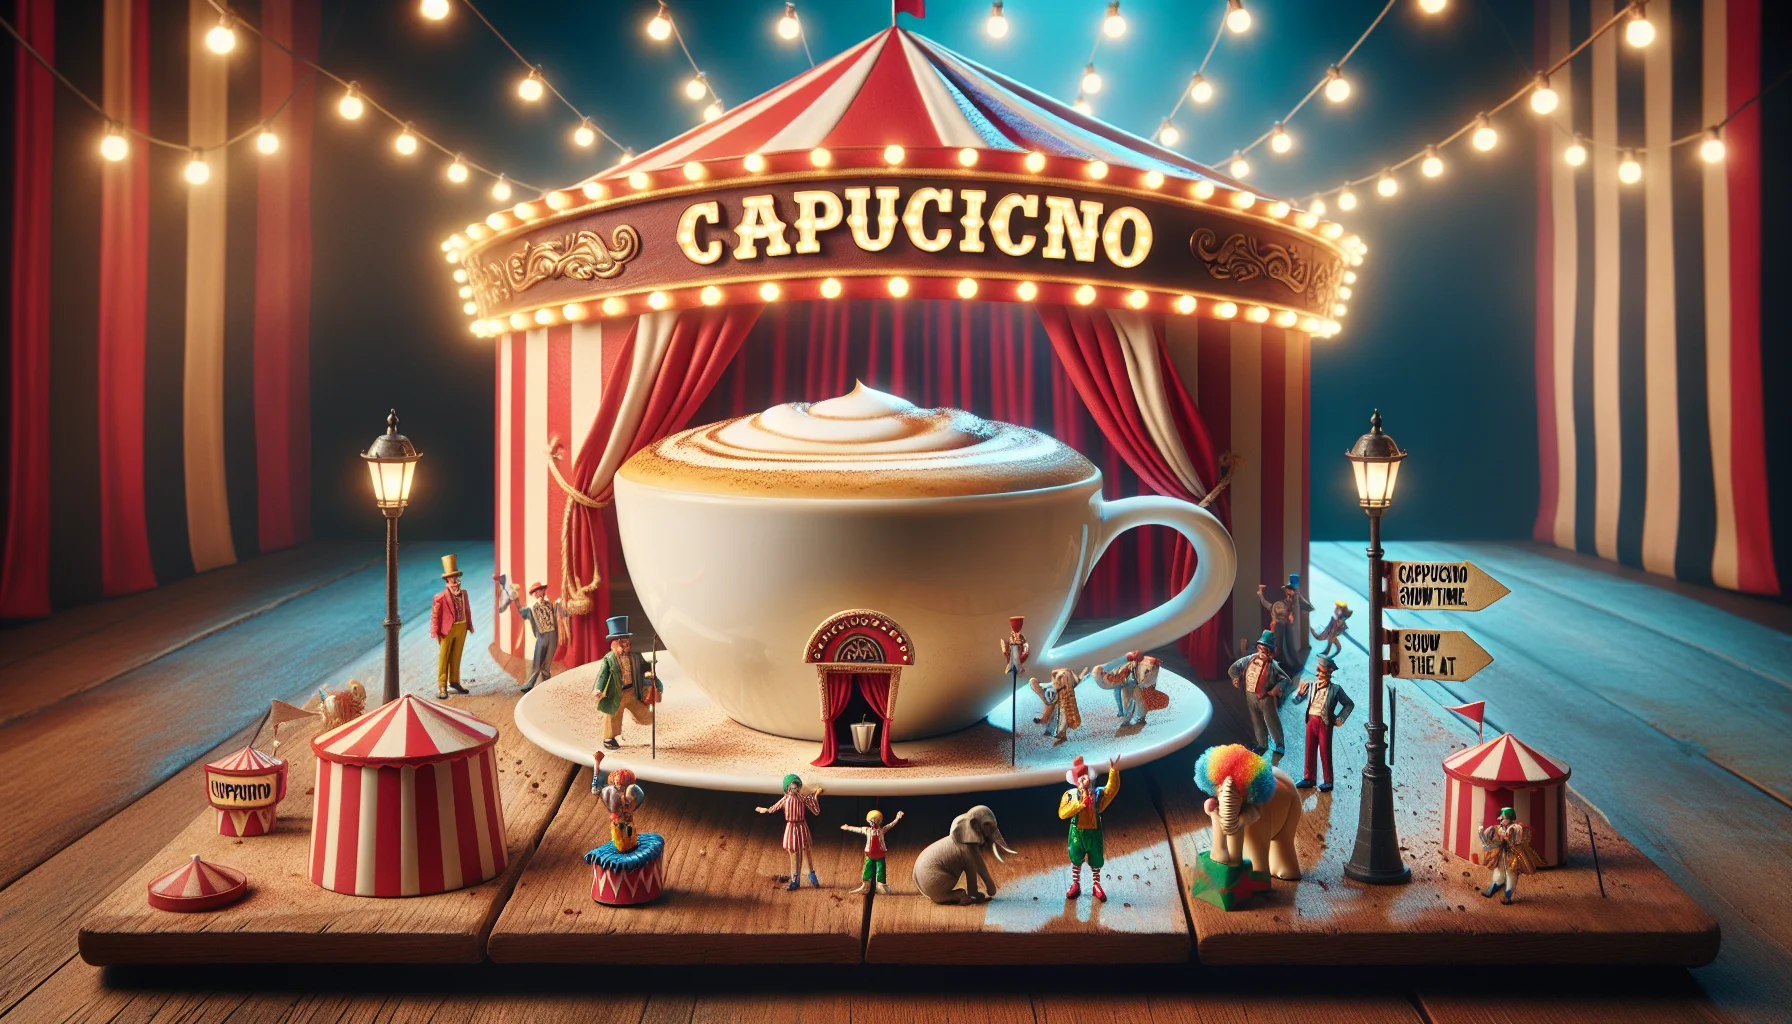 Create a realistic image of a cappuccino cup placed in a humorous setting. The cappuccino cup, with a perfect frothy top, sits in a miniature red and white striped circus tent surrounded by tiny clowns and elephants, implying that it is the star of the show. The background is illuminated with old-fashioned carousel lights, adding to the festive ambiance. A signpost next to the tent reads 'Cappuccino Show Time.' The entire scene bursts with splashes of vibrant colors, giving a fun, playful vibe that makes coffee drinking seem like an entertaining circus performance.